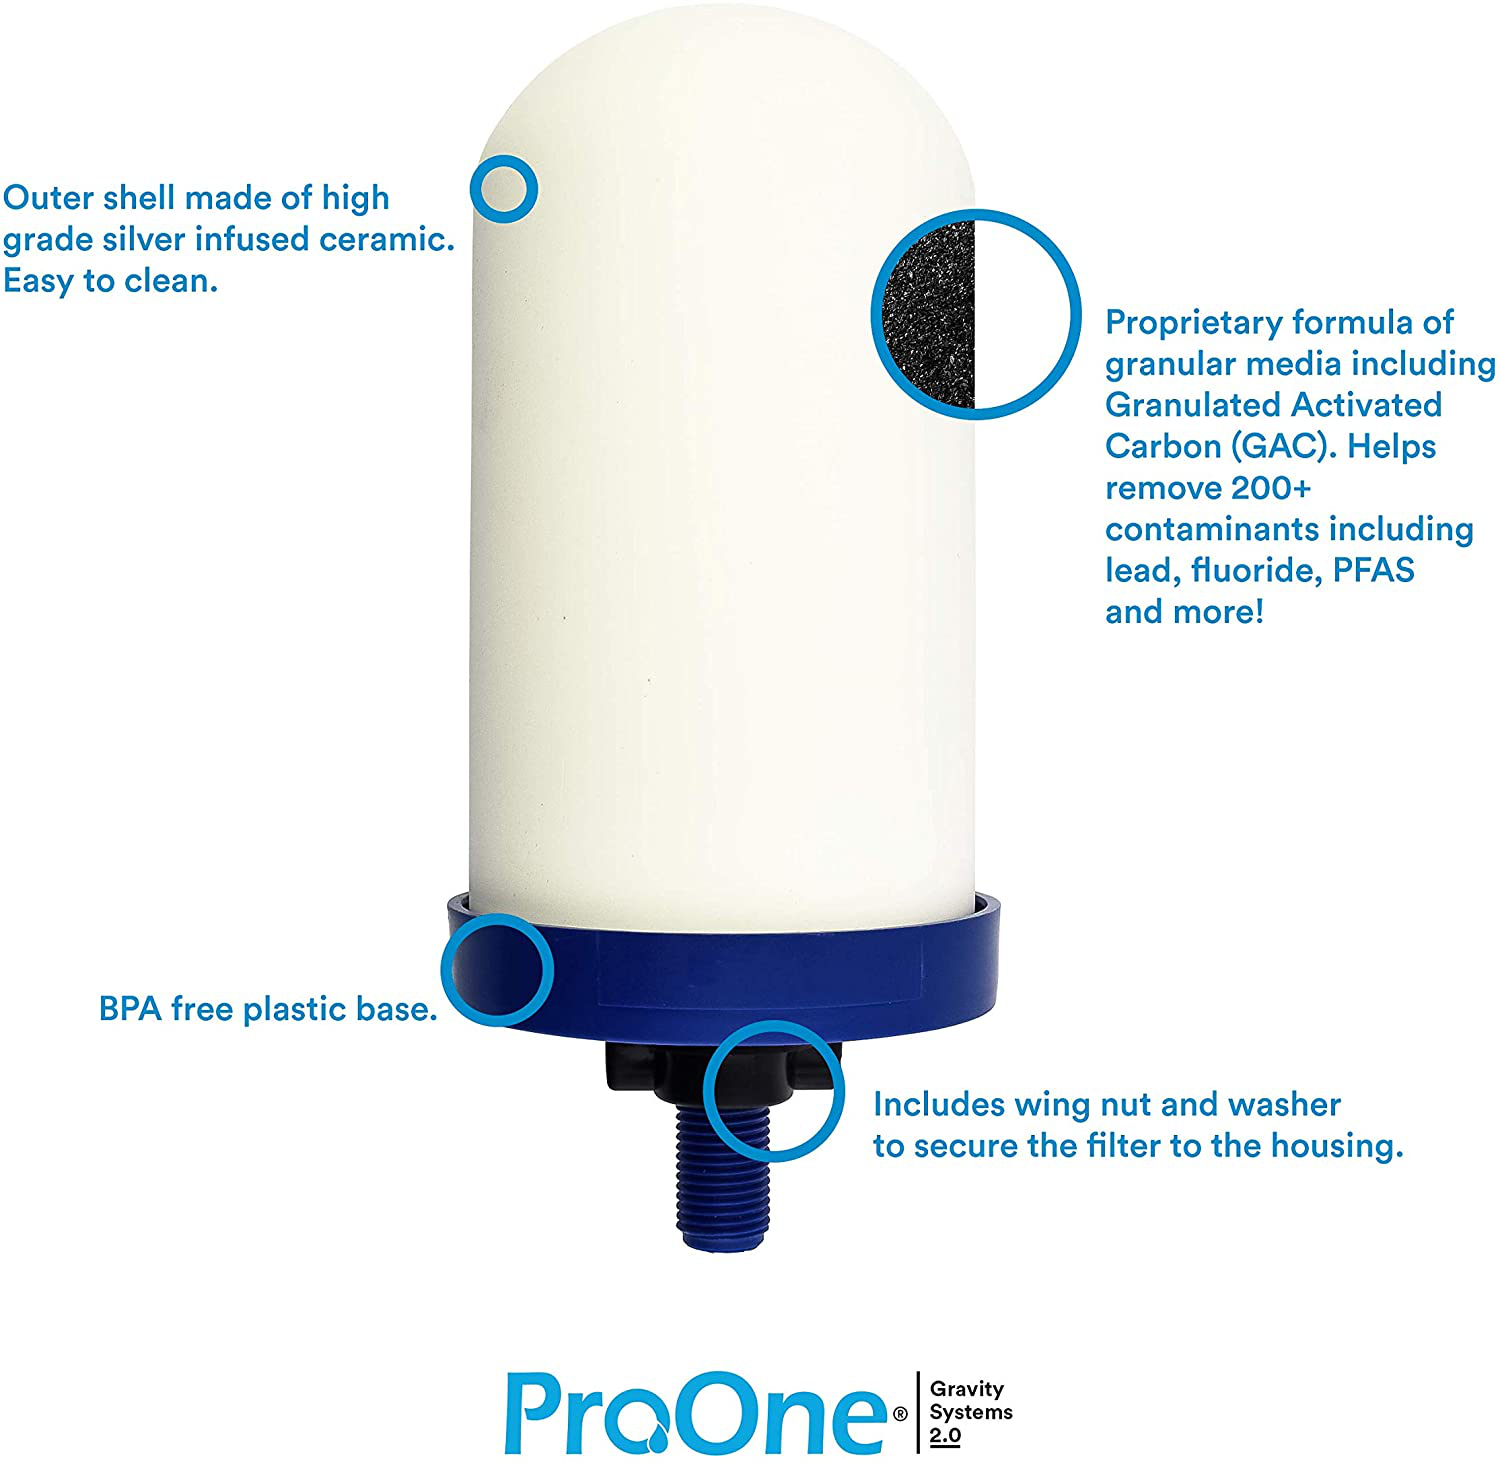 ProOne G2.0 7-Inch Gravity Water Replacement Filter, Big+ Replacement Water Filter for Countertop Gravity Water Filtration Systems